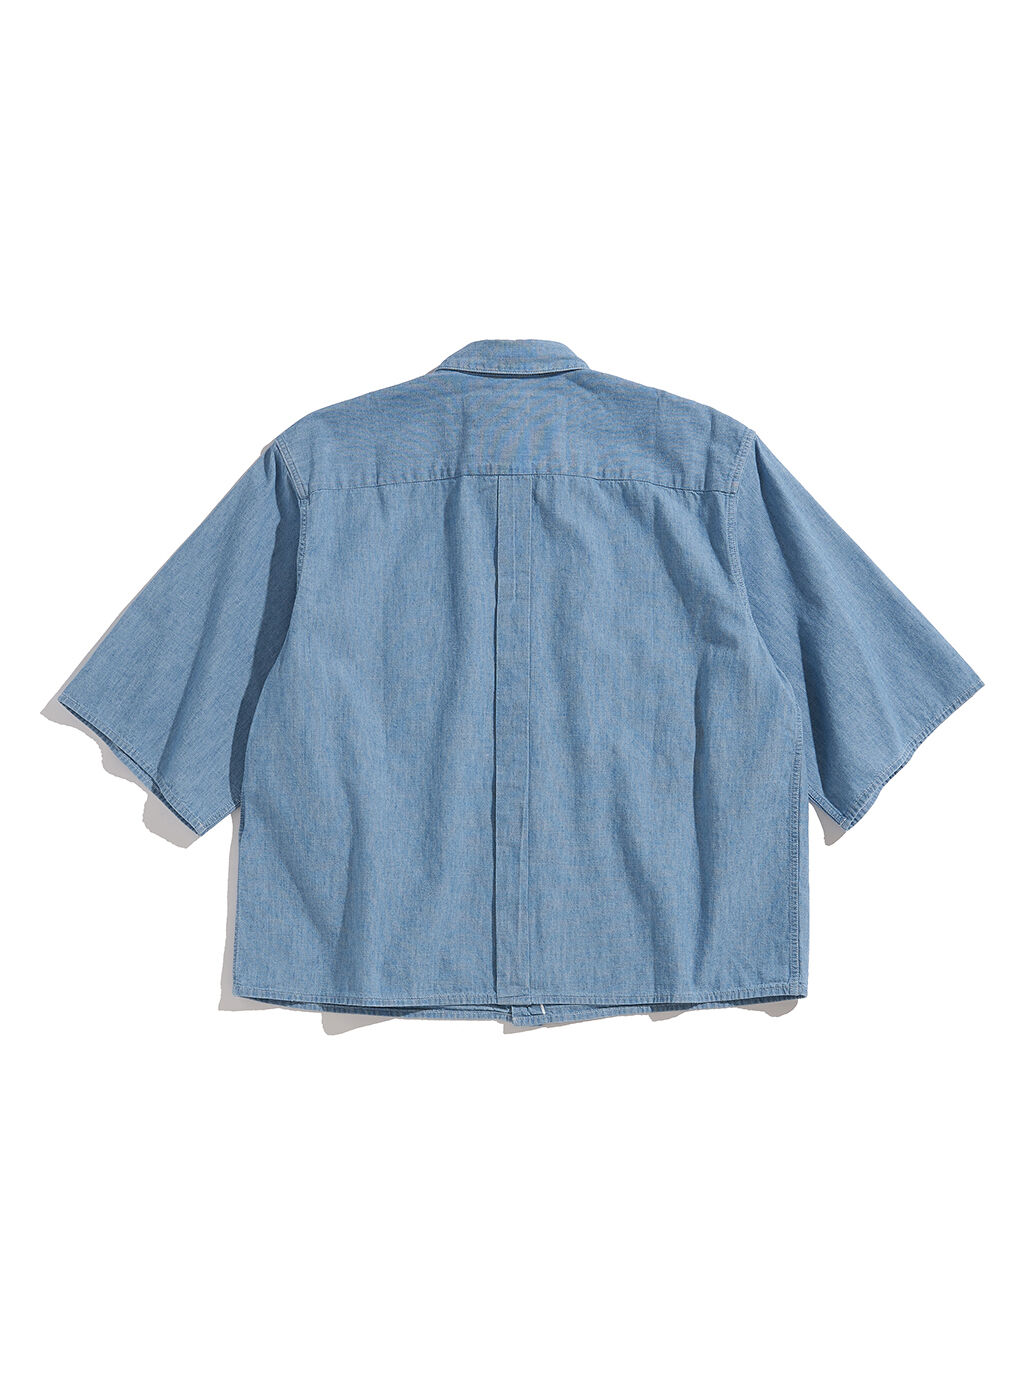 DENIM FAMILYBY LEVI'S® MADE&CRAFTED® シャンブレーショートスリーブ 